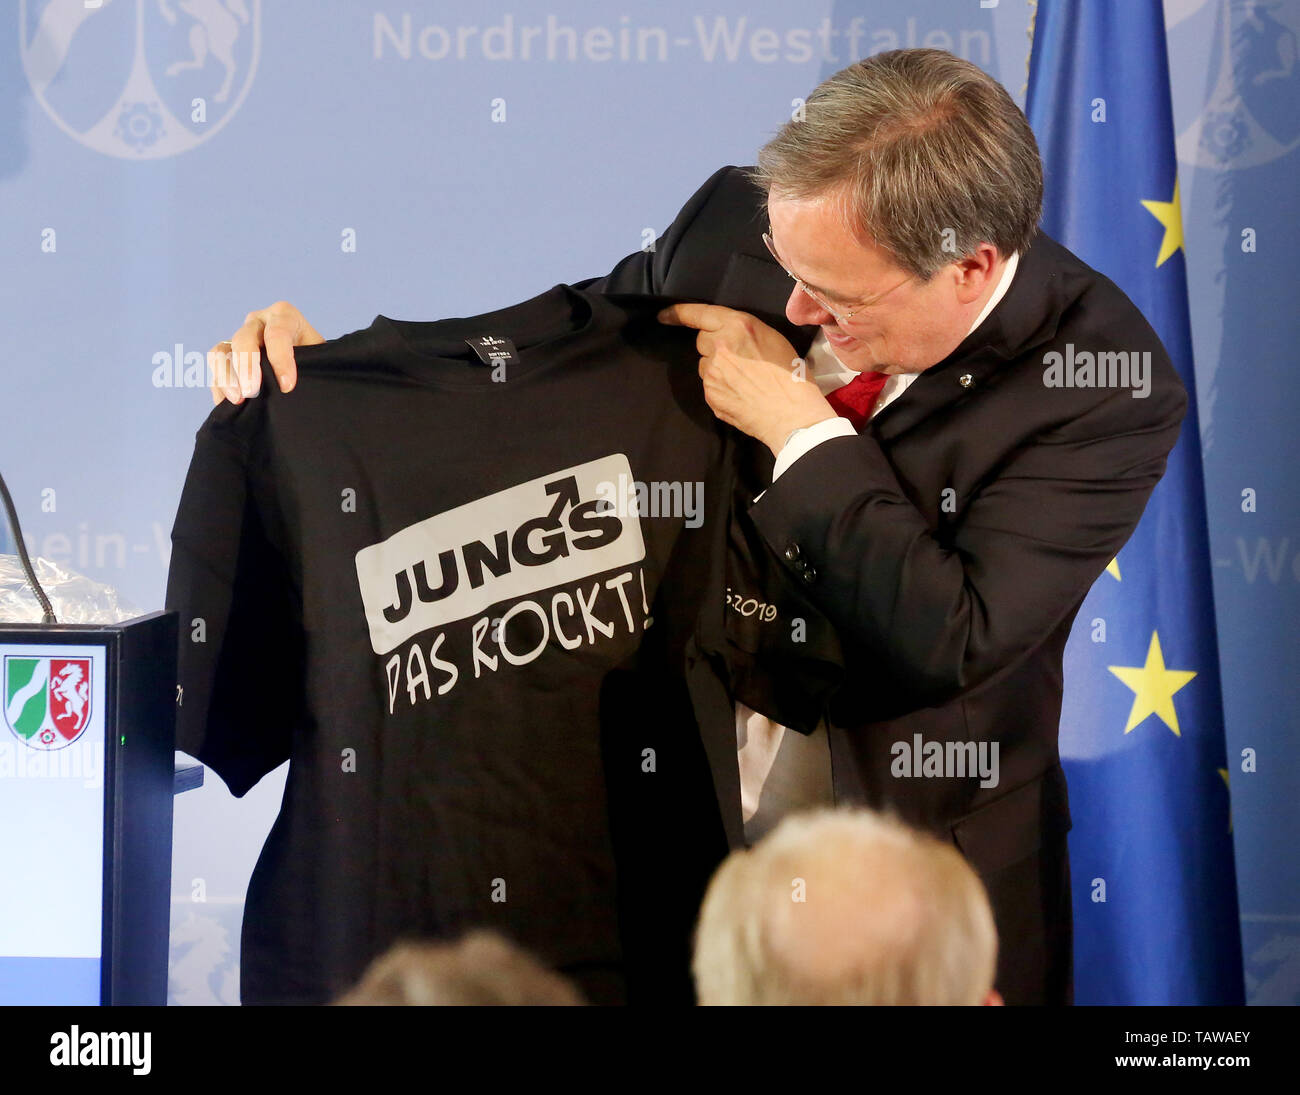 Duesseldorf, Germany. 28th May, 2019. Armin Laschet (CDU), Prime Minister of North Rhine-Westphalia, received a T-shirt as a present from the prizewinners, the Duisburg 'Jungs e.V.', at the Mevlüde Genc Medal ceremony. The state government had donated the Mevlüde-Genç Medal for special services to tolerance, reconciliation between cultures and the peaceful coexistence of religions. The Genç family was victims of the Solingen arson attack on the night of 29 May 1993. (headline correction) Credit: Roland Weihrauch/dpa/Alamy Live News Stock Photo